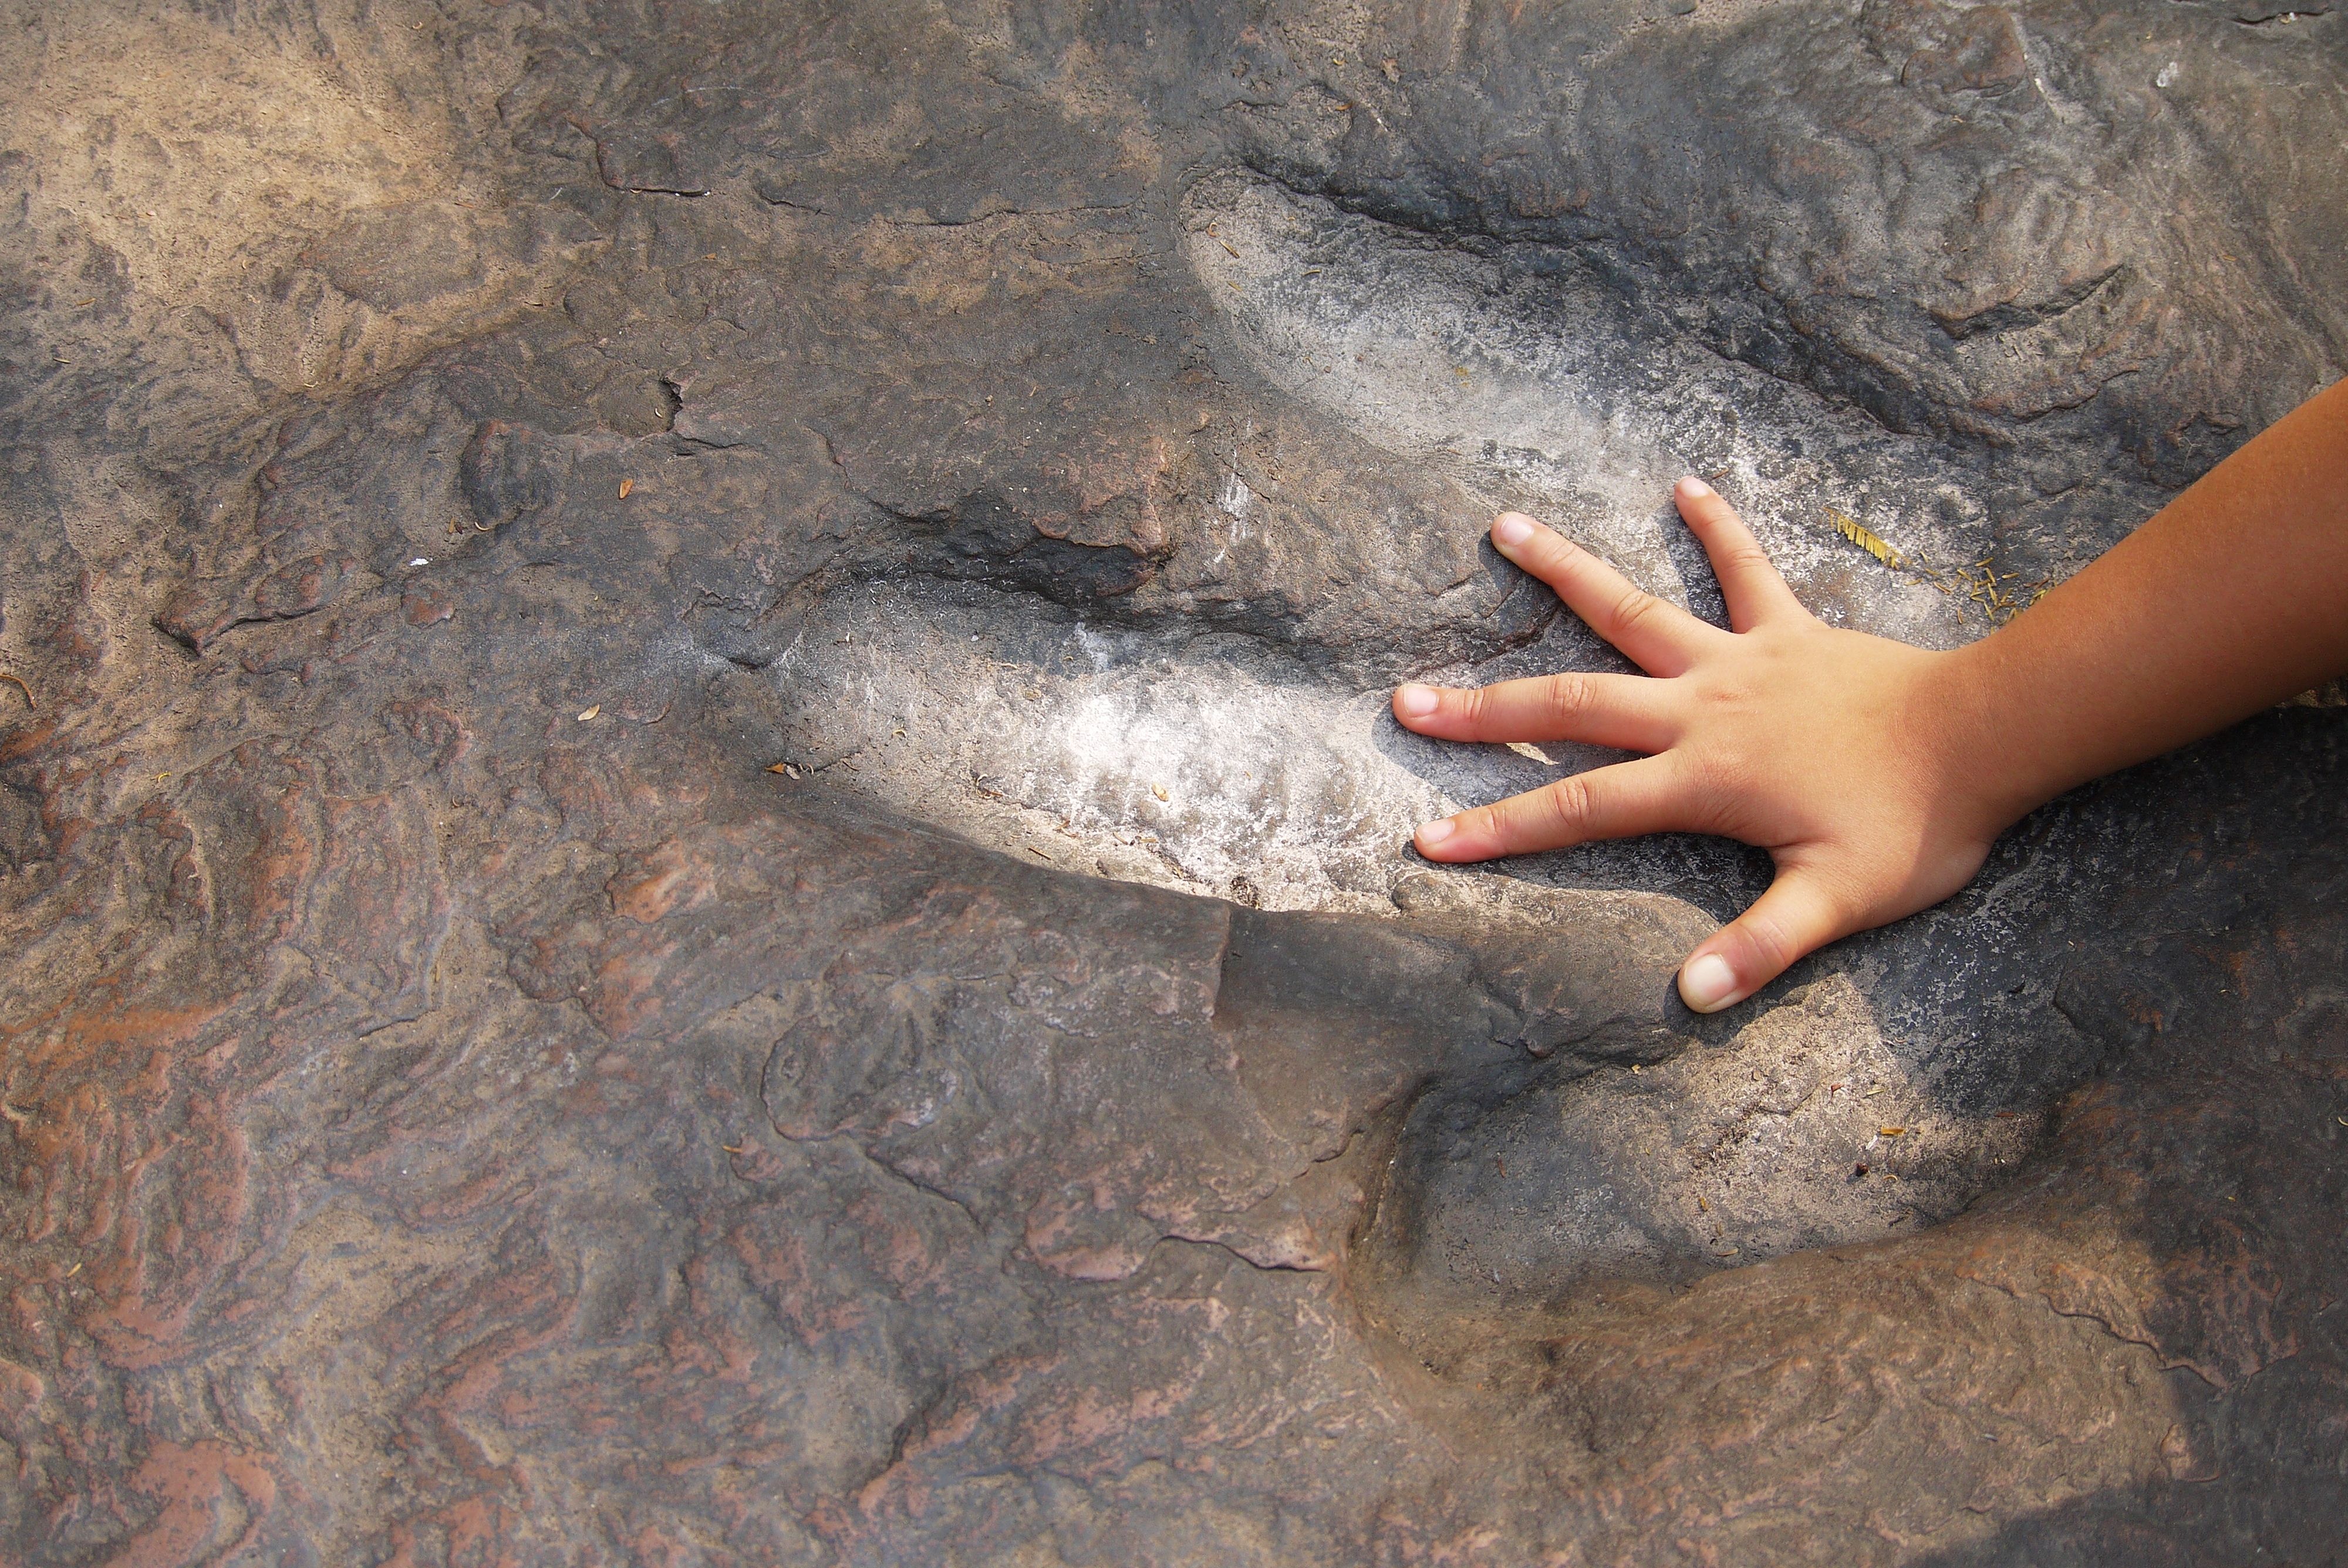 Child hands compared with dinosaur footprints in the forest park, discovery image, kids learn outside the classroom to enhance the experience, selective focus. Image by Rattana/Shutterstock. Undated.